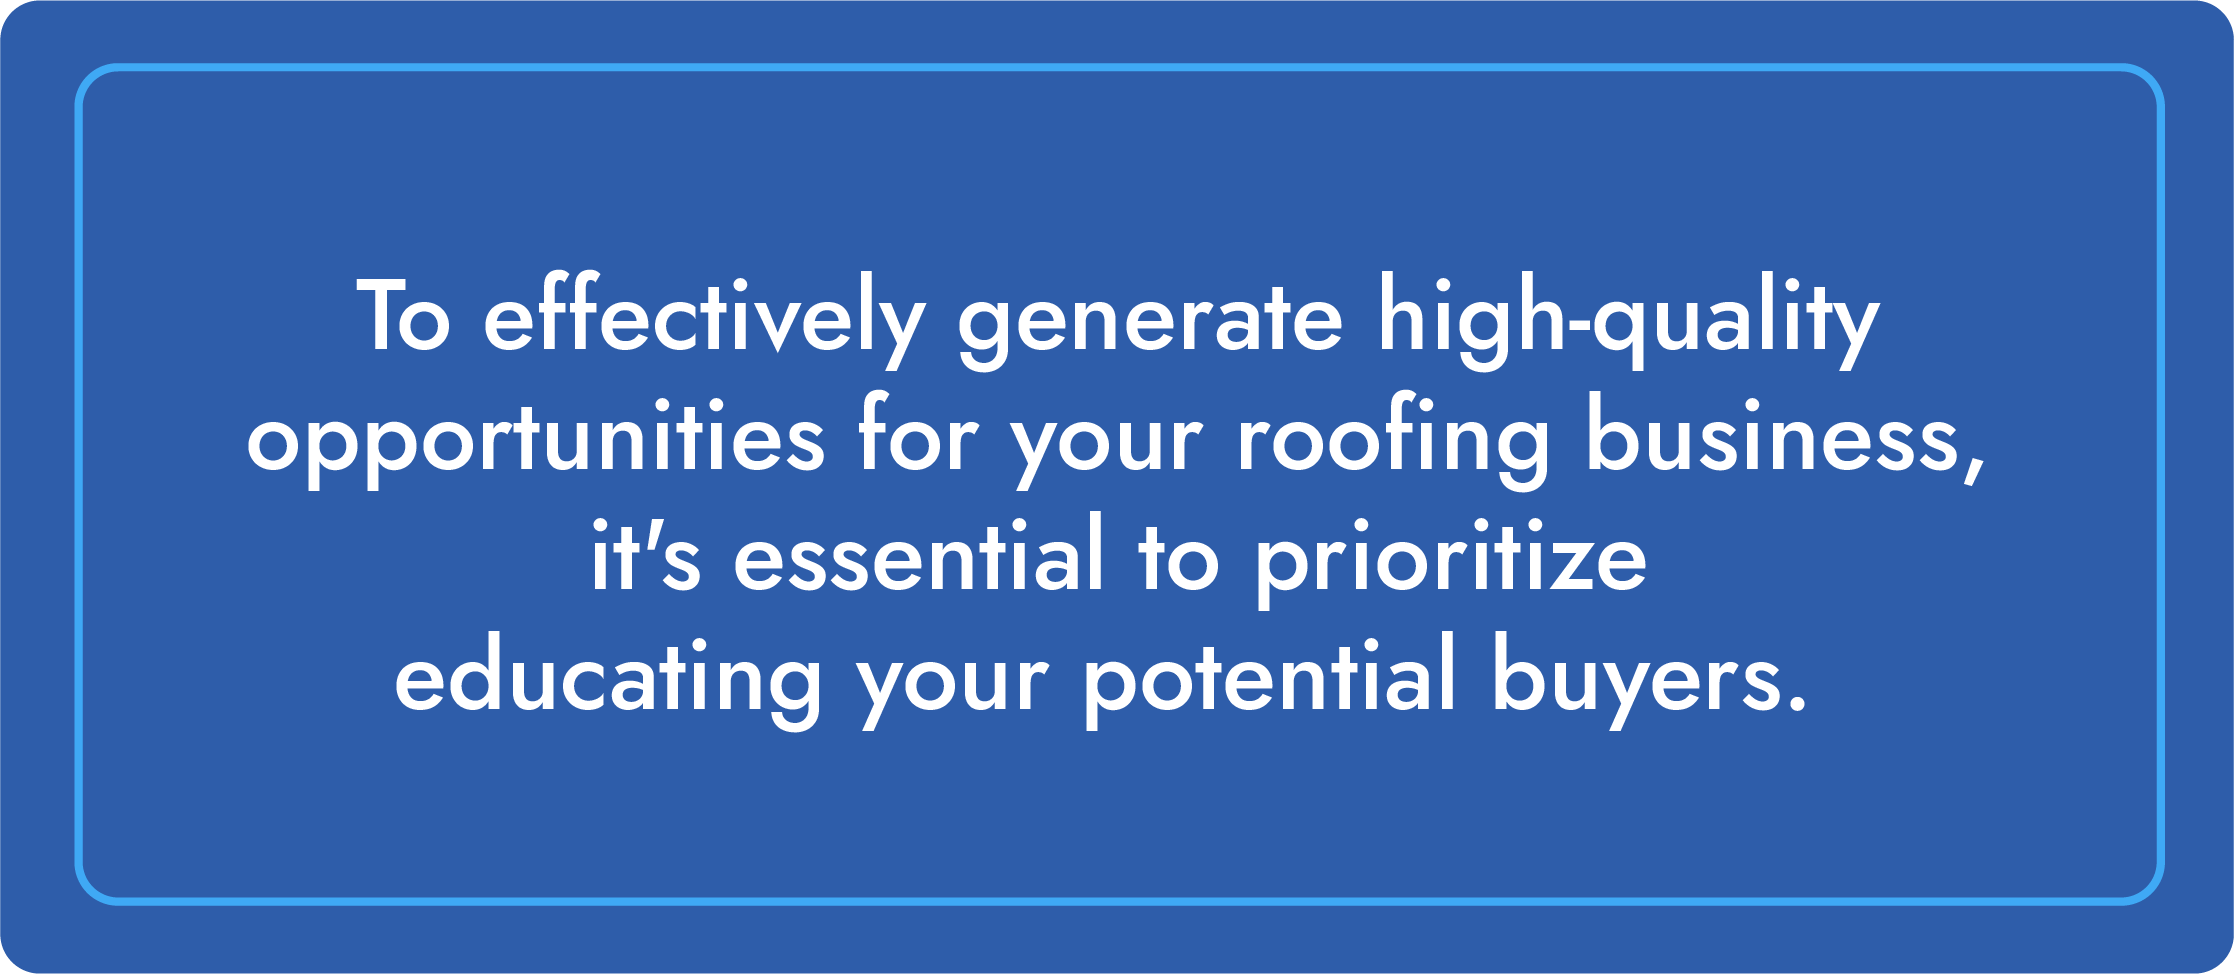 To effectively generate high-quality opportunities for your roofing business, it's essential to prioritize educating your potential buyers.